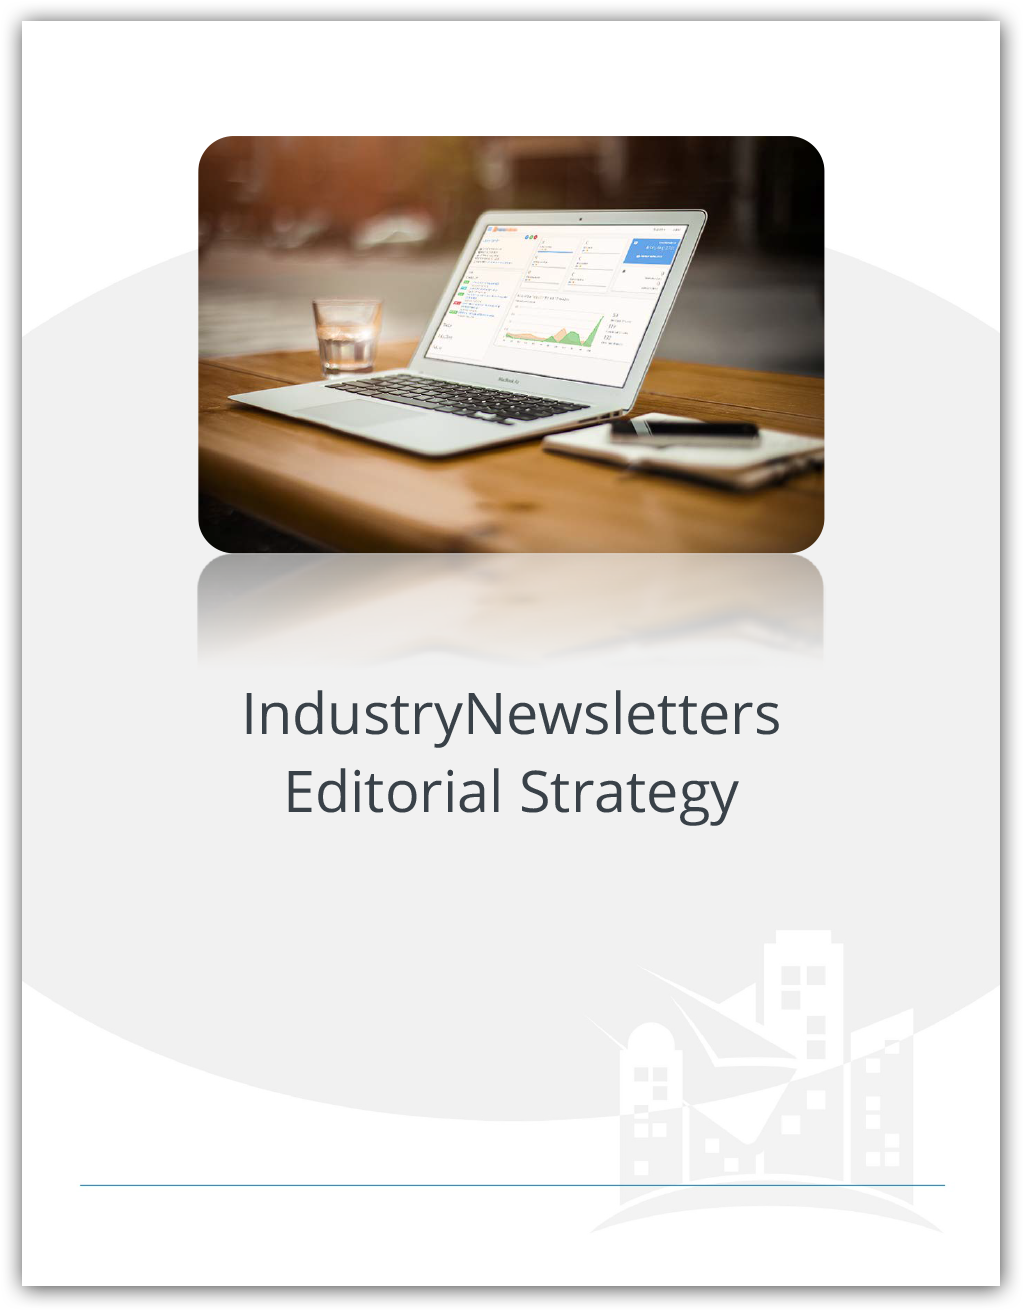 Learn More About The IndustryNewsletters Editorial Strategy